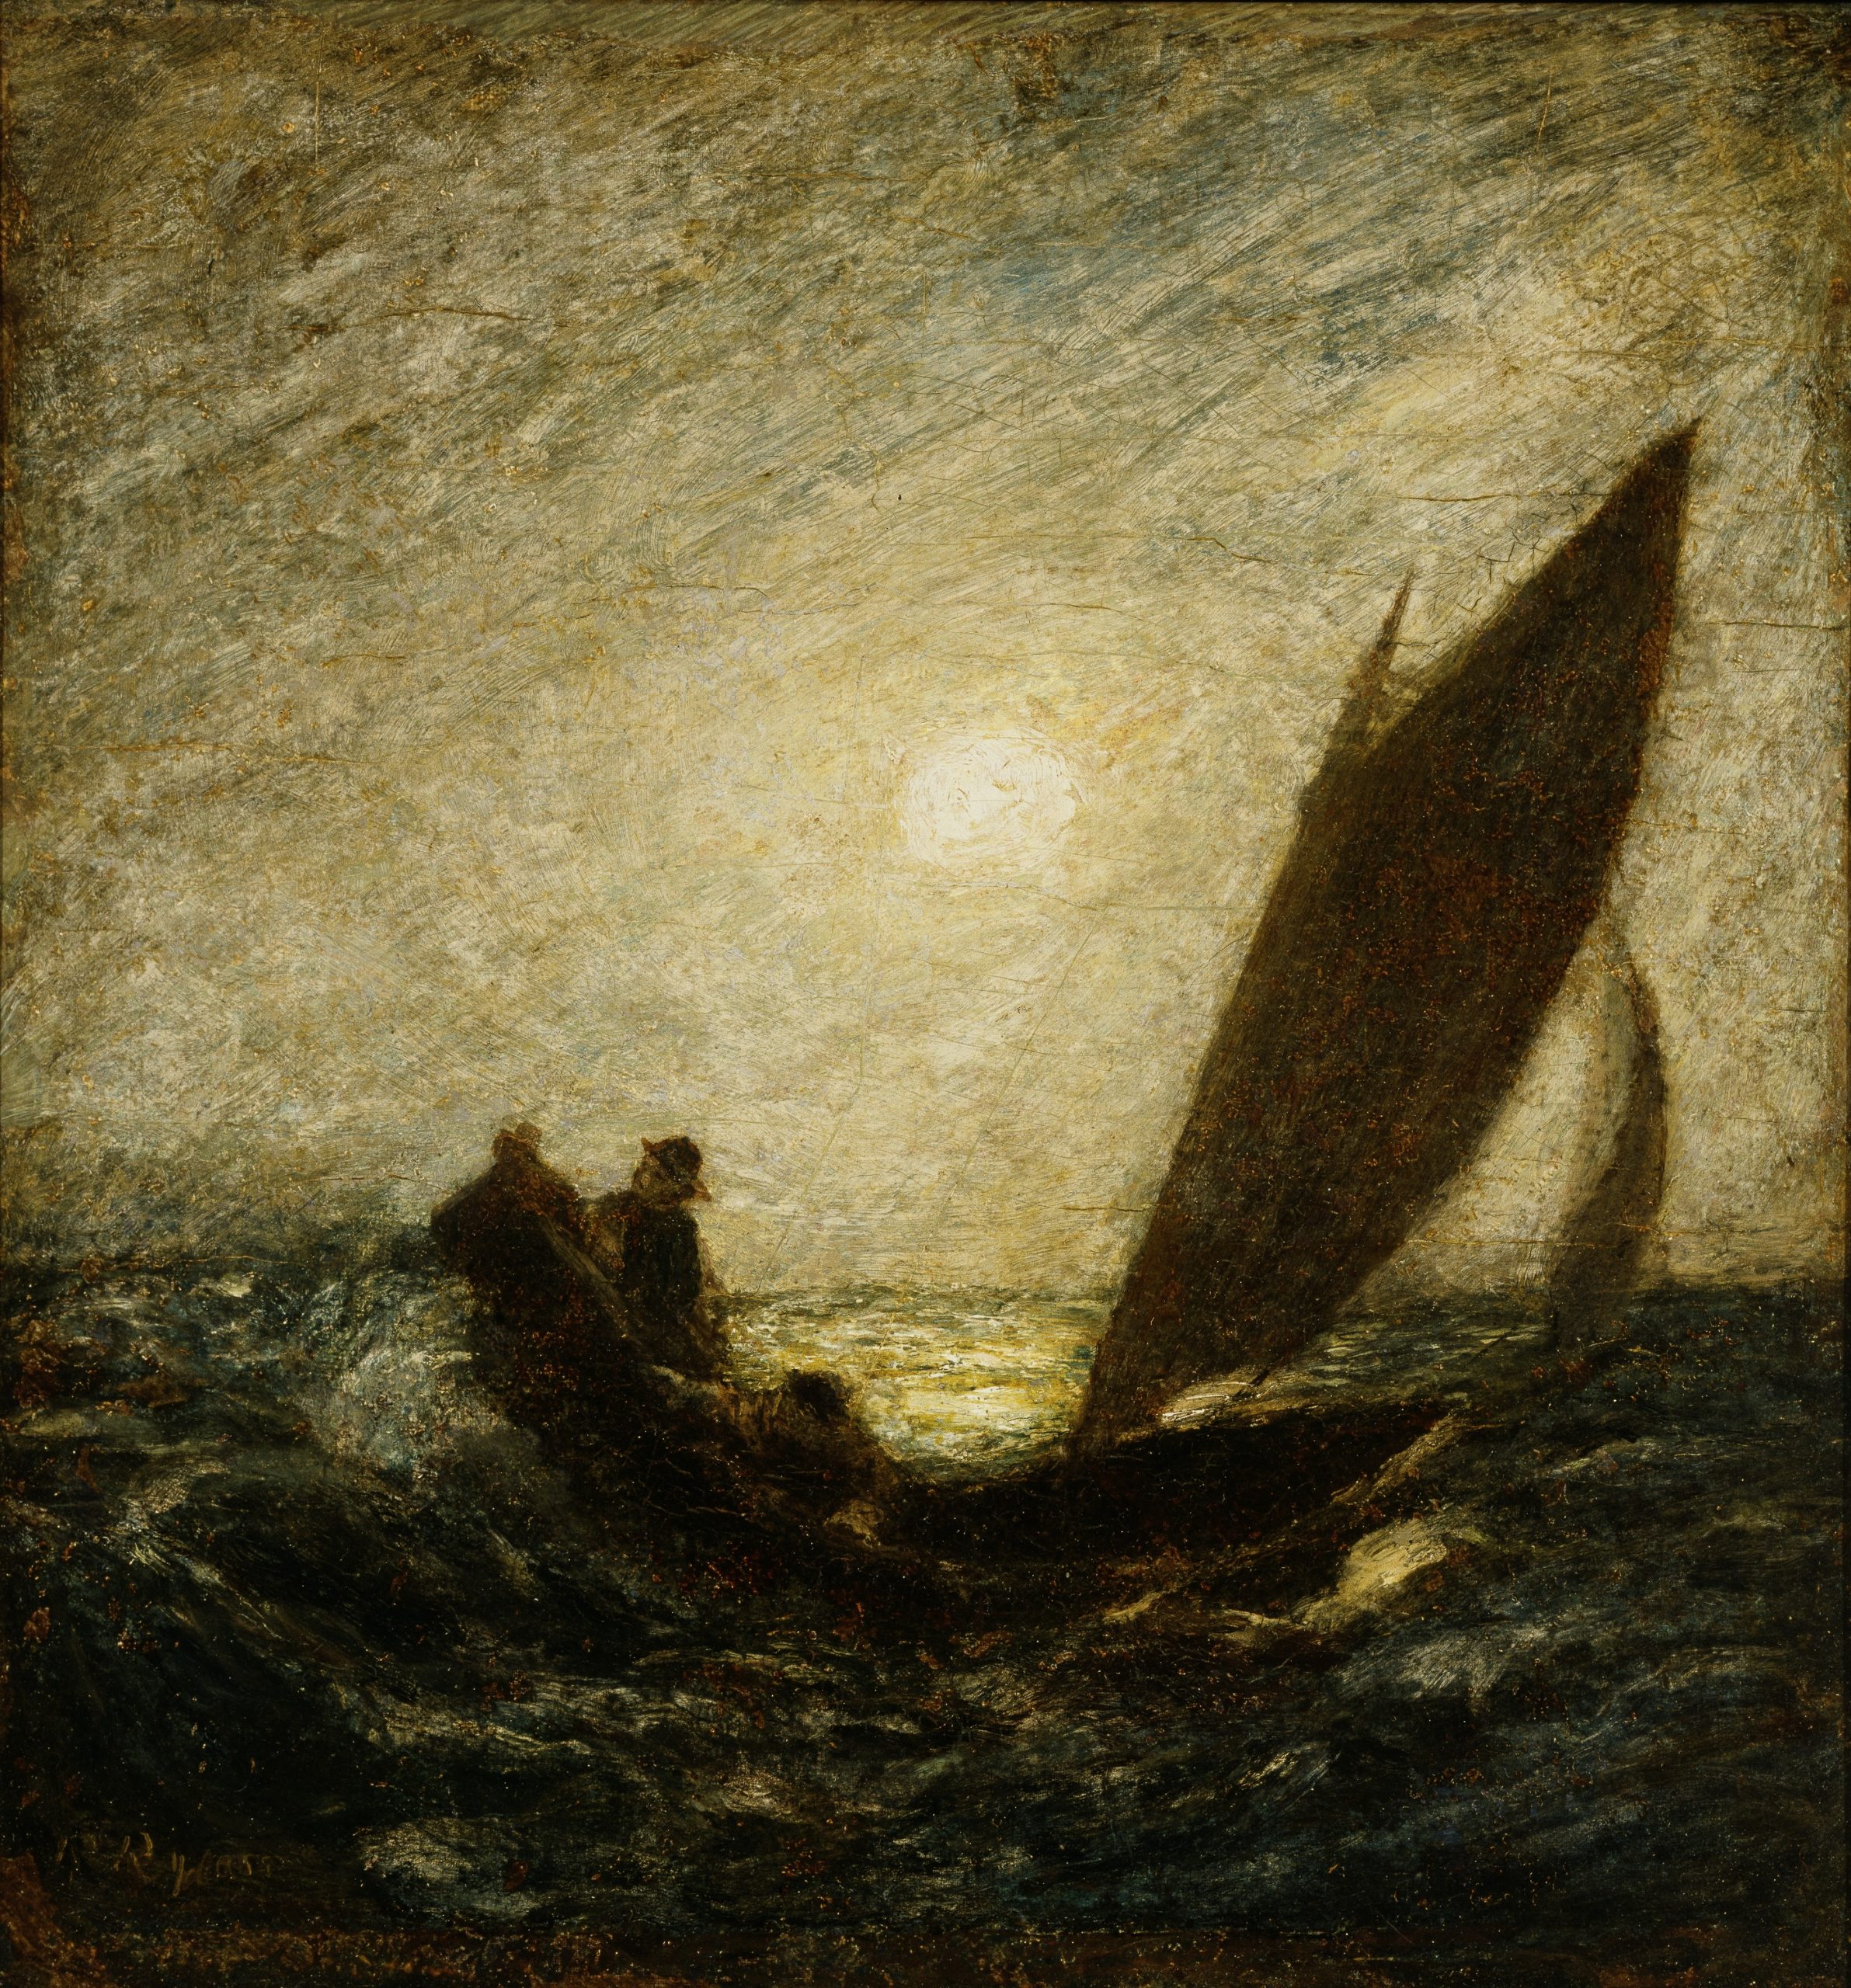 Albert Pinkham Ryder, With Sloping Mast and Dipping Prow, oil on canvas mounted on fiberboard, ca. 1880-1885 (Smithsonian American Art Museum, Washington D.C.). Photo: Public Domain.